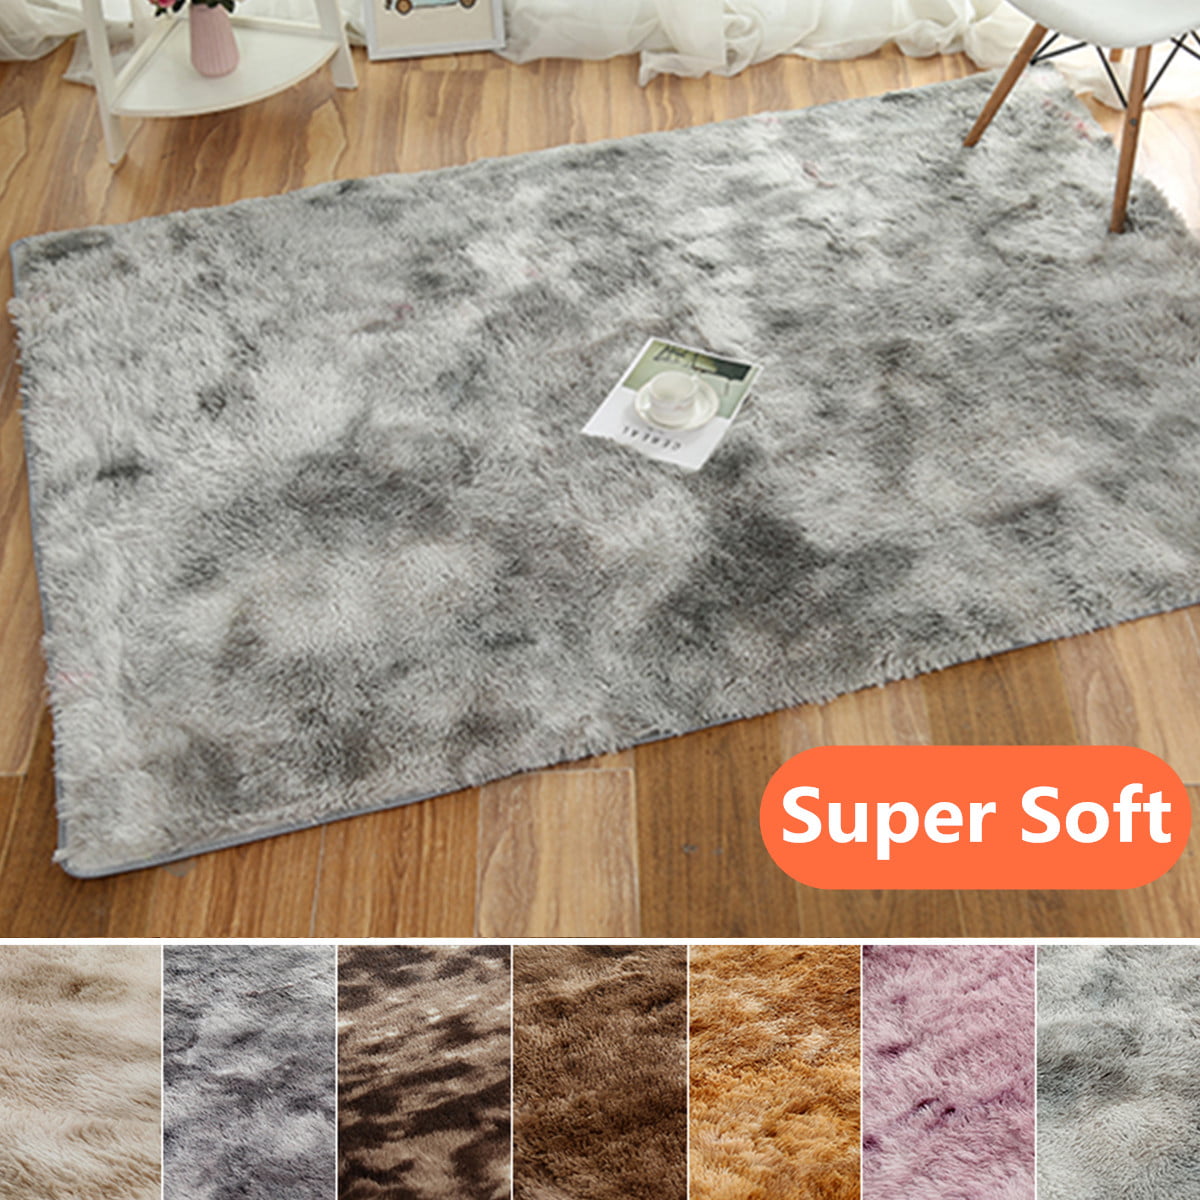 Sienna Faux Rabbit Fur Fluffy Rug Anti-Slip Carpet Plain Silky Non-Shed Super Soft Bedroom Rugs for Adults Area Mat 80 x 150cm Silver Grey